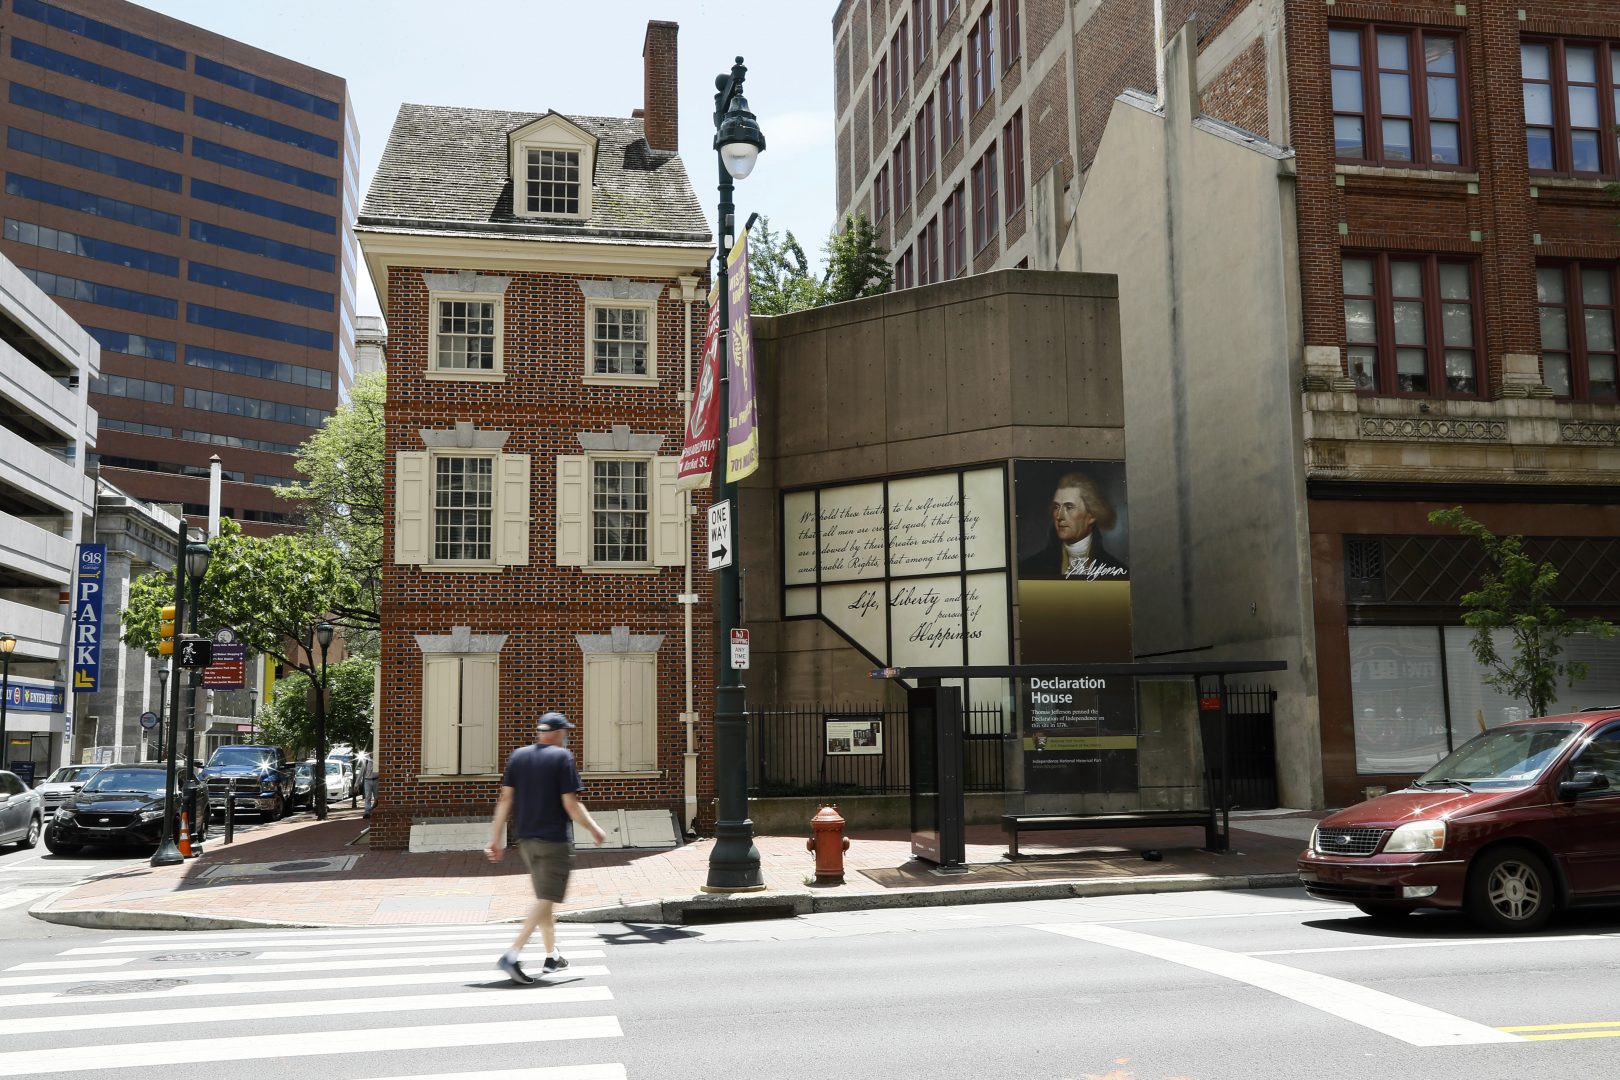 In this June 30, 2020, photo, a man walks in front of the Declaration House in Philadelphia. Countless words have been written about the Declaration of Independence and Thomas Jefferson, but few about Robert Hemings, the slave who was on hand as Jefferson famously declared that “All men are created equal.”  According to the National Park Service, Hemings is not included in the exhibit texts of the Declaration House, a reconstruction of the home Jefferson stayed in as a guest of the Philadelphia bricklayer Jacob Graff.